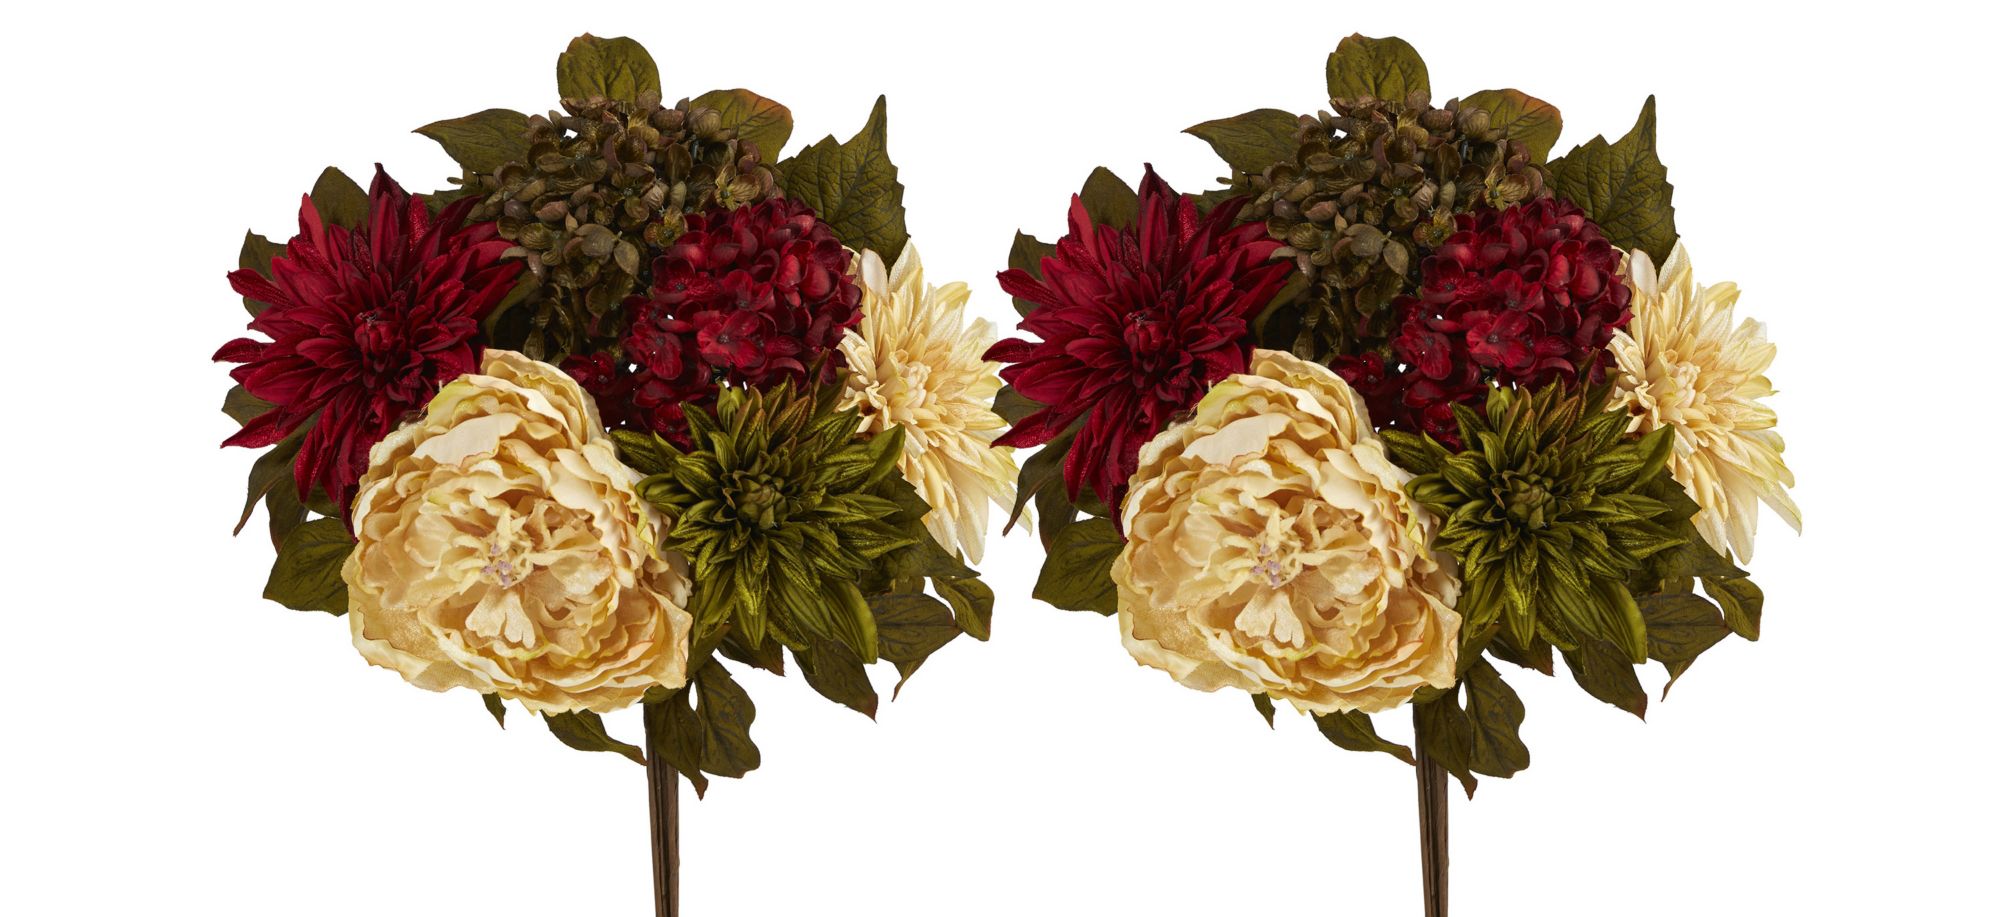 16in. Peony, Hydrangea and Dahlia Artificial Flower Bouquet (Set of 2) in Red/Cream by Bellanest